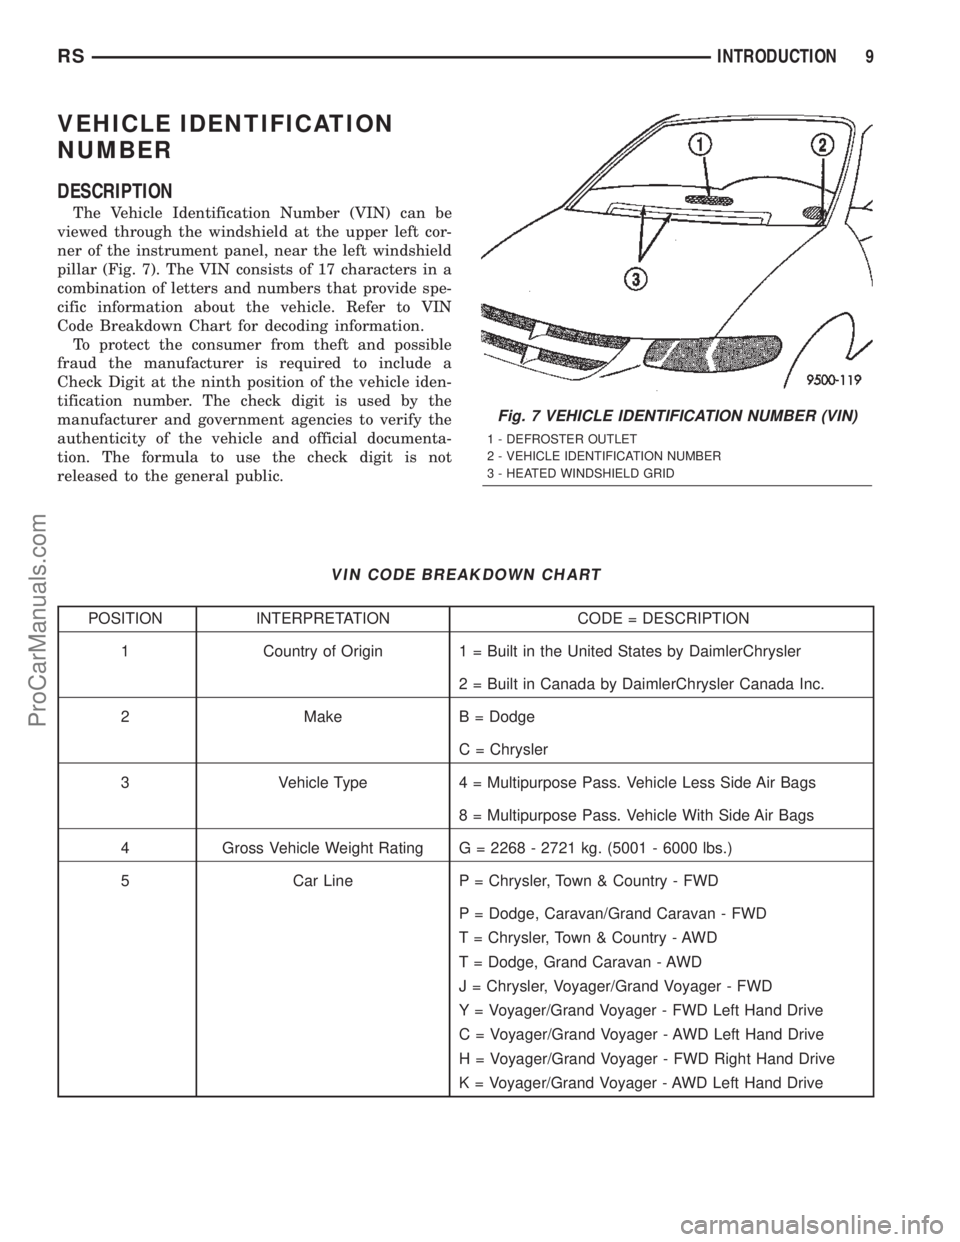 CHRYSLER VOYAGER 2002  Service Manual VEHICLE IDENTIFICATION
NUMBER
DESCRIPTION
The Vehicle Identification Number (VIN) can be
viewed through the windshield at the upper left cor-
ner of the instrument panel, near the left windshield
pill